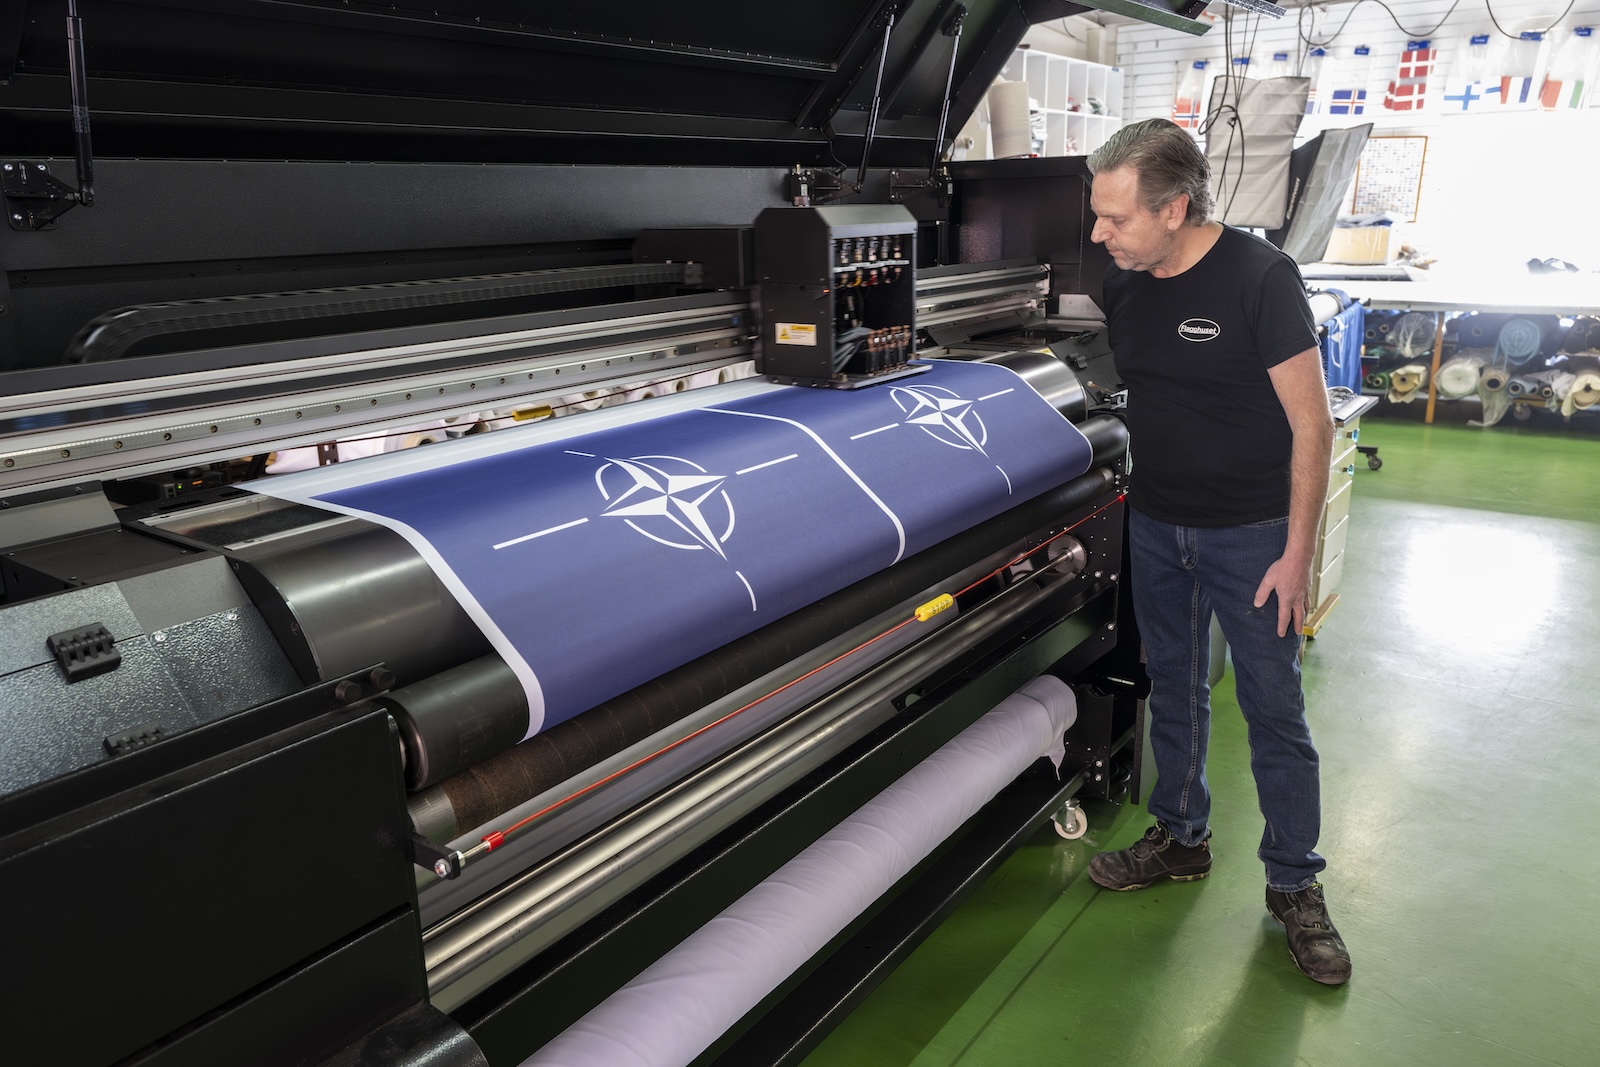 epa11204073 Stig Kvarnryd, CEO of flag manufacturer 'Flagghuset', watches as new NATO flags are printed in the factory in Akersberga, outside Stockholm, Sweden, 07 March 2024. At the family business in Akersberga, printing the blue NATO flag is in full swing ahead of Sweden's accession to NATO, as municipalities, authorities and businesses want to be ready to raise the new flag. Hungaryâ€™s president ratified Stockholmâ€™s accession documents on 05 March, paving the way for the accession of the Nordic country to the alliance.  EPA/Anders Wiklund SWEDEN OUT